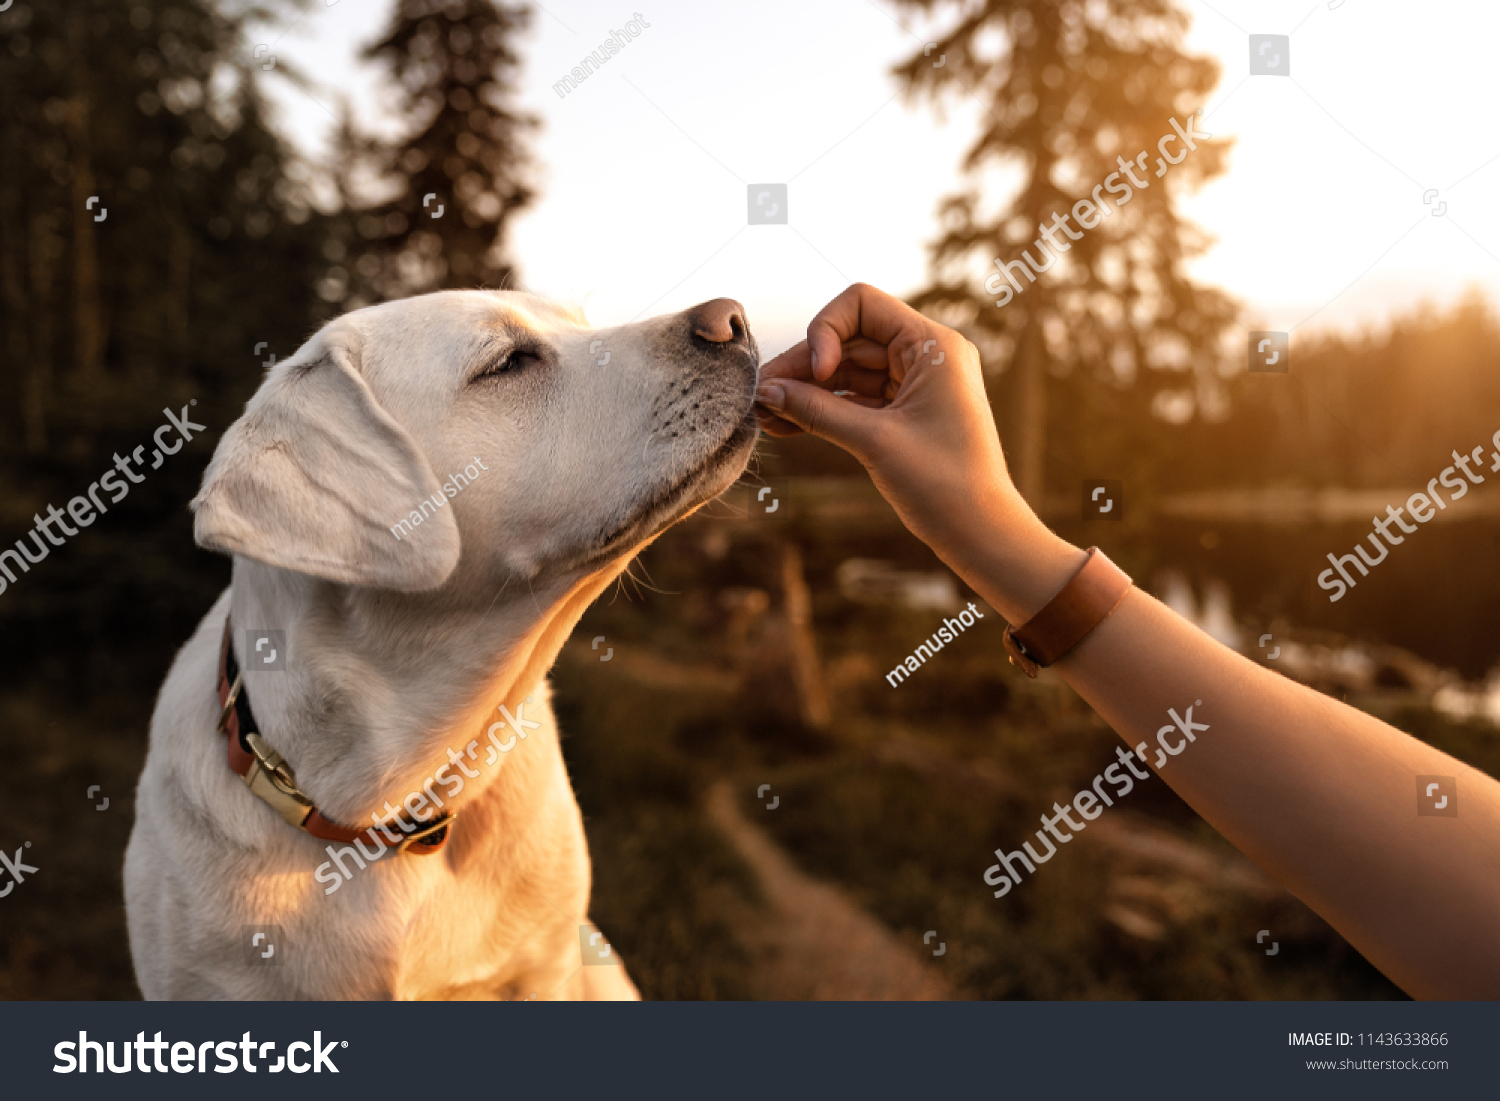 young beautiful labrador retriever puppy is eating some dog food out of humans hand outside during golden sunset #1143633866